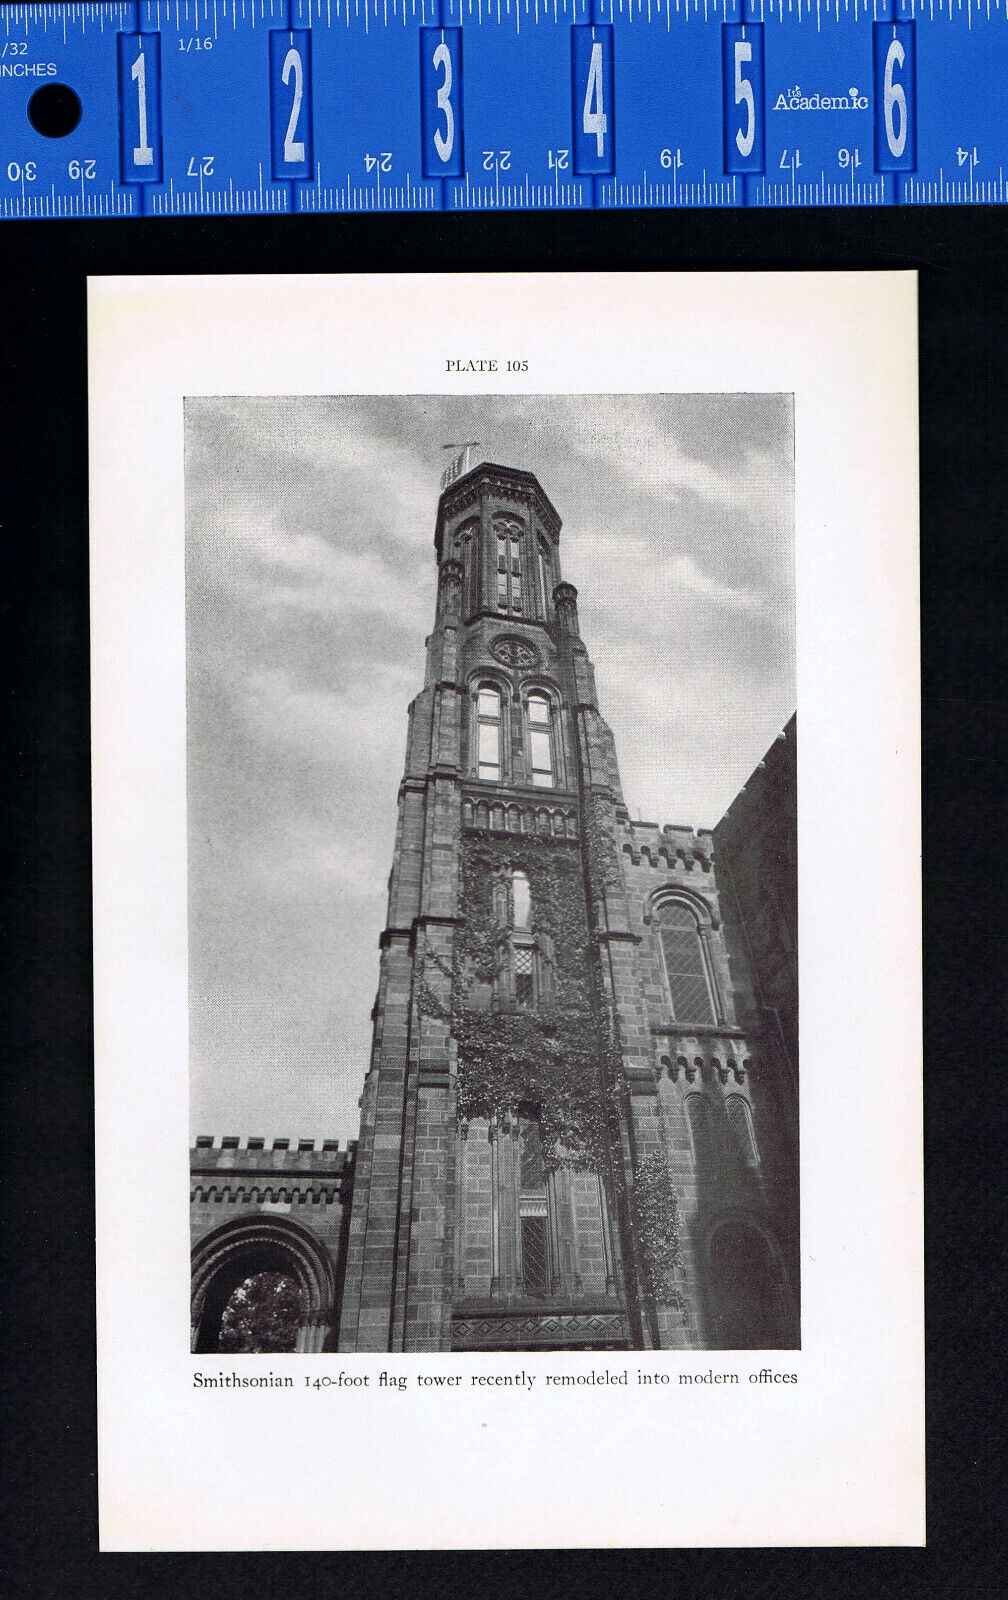 Plant Growth and Photosynthesis Lab & Smithsonian Flag Tower-1934 Print